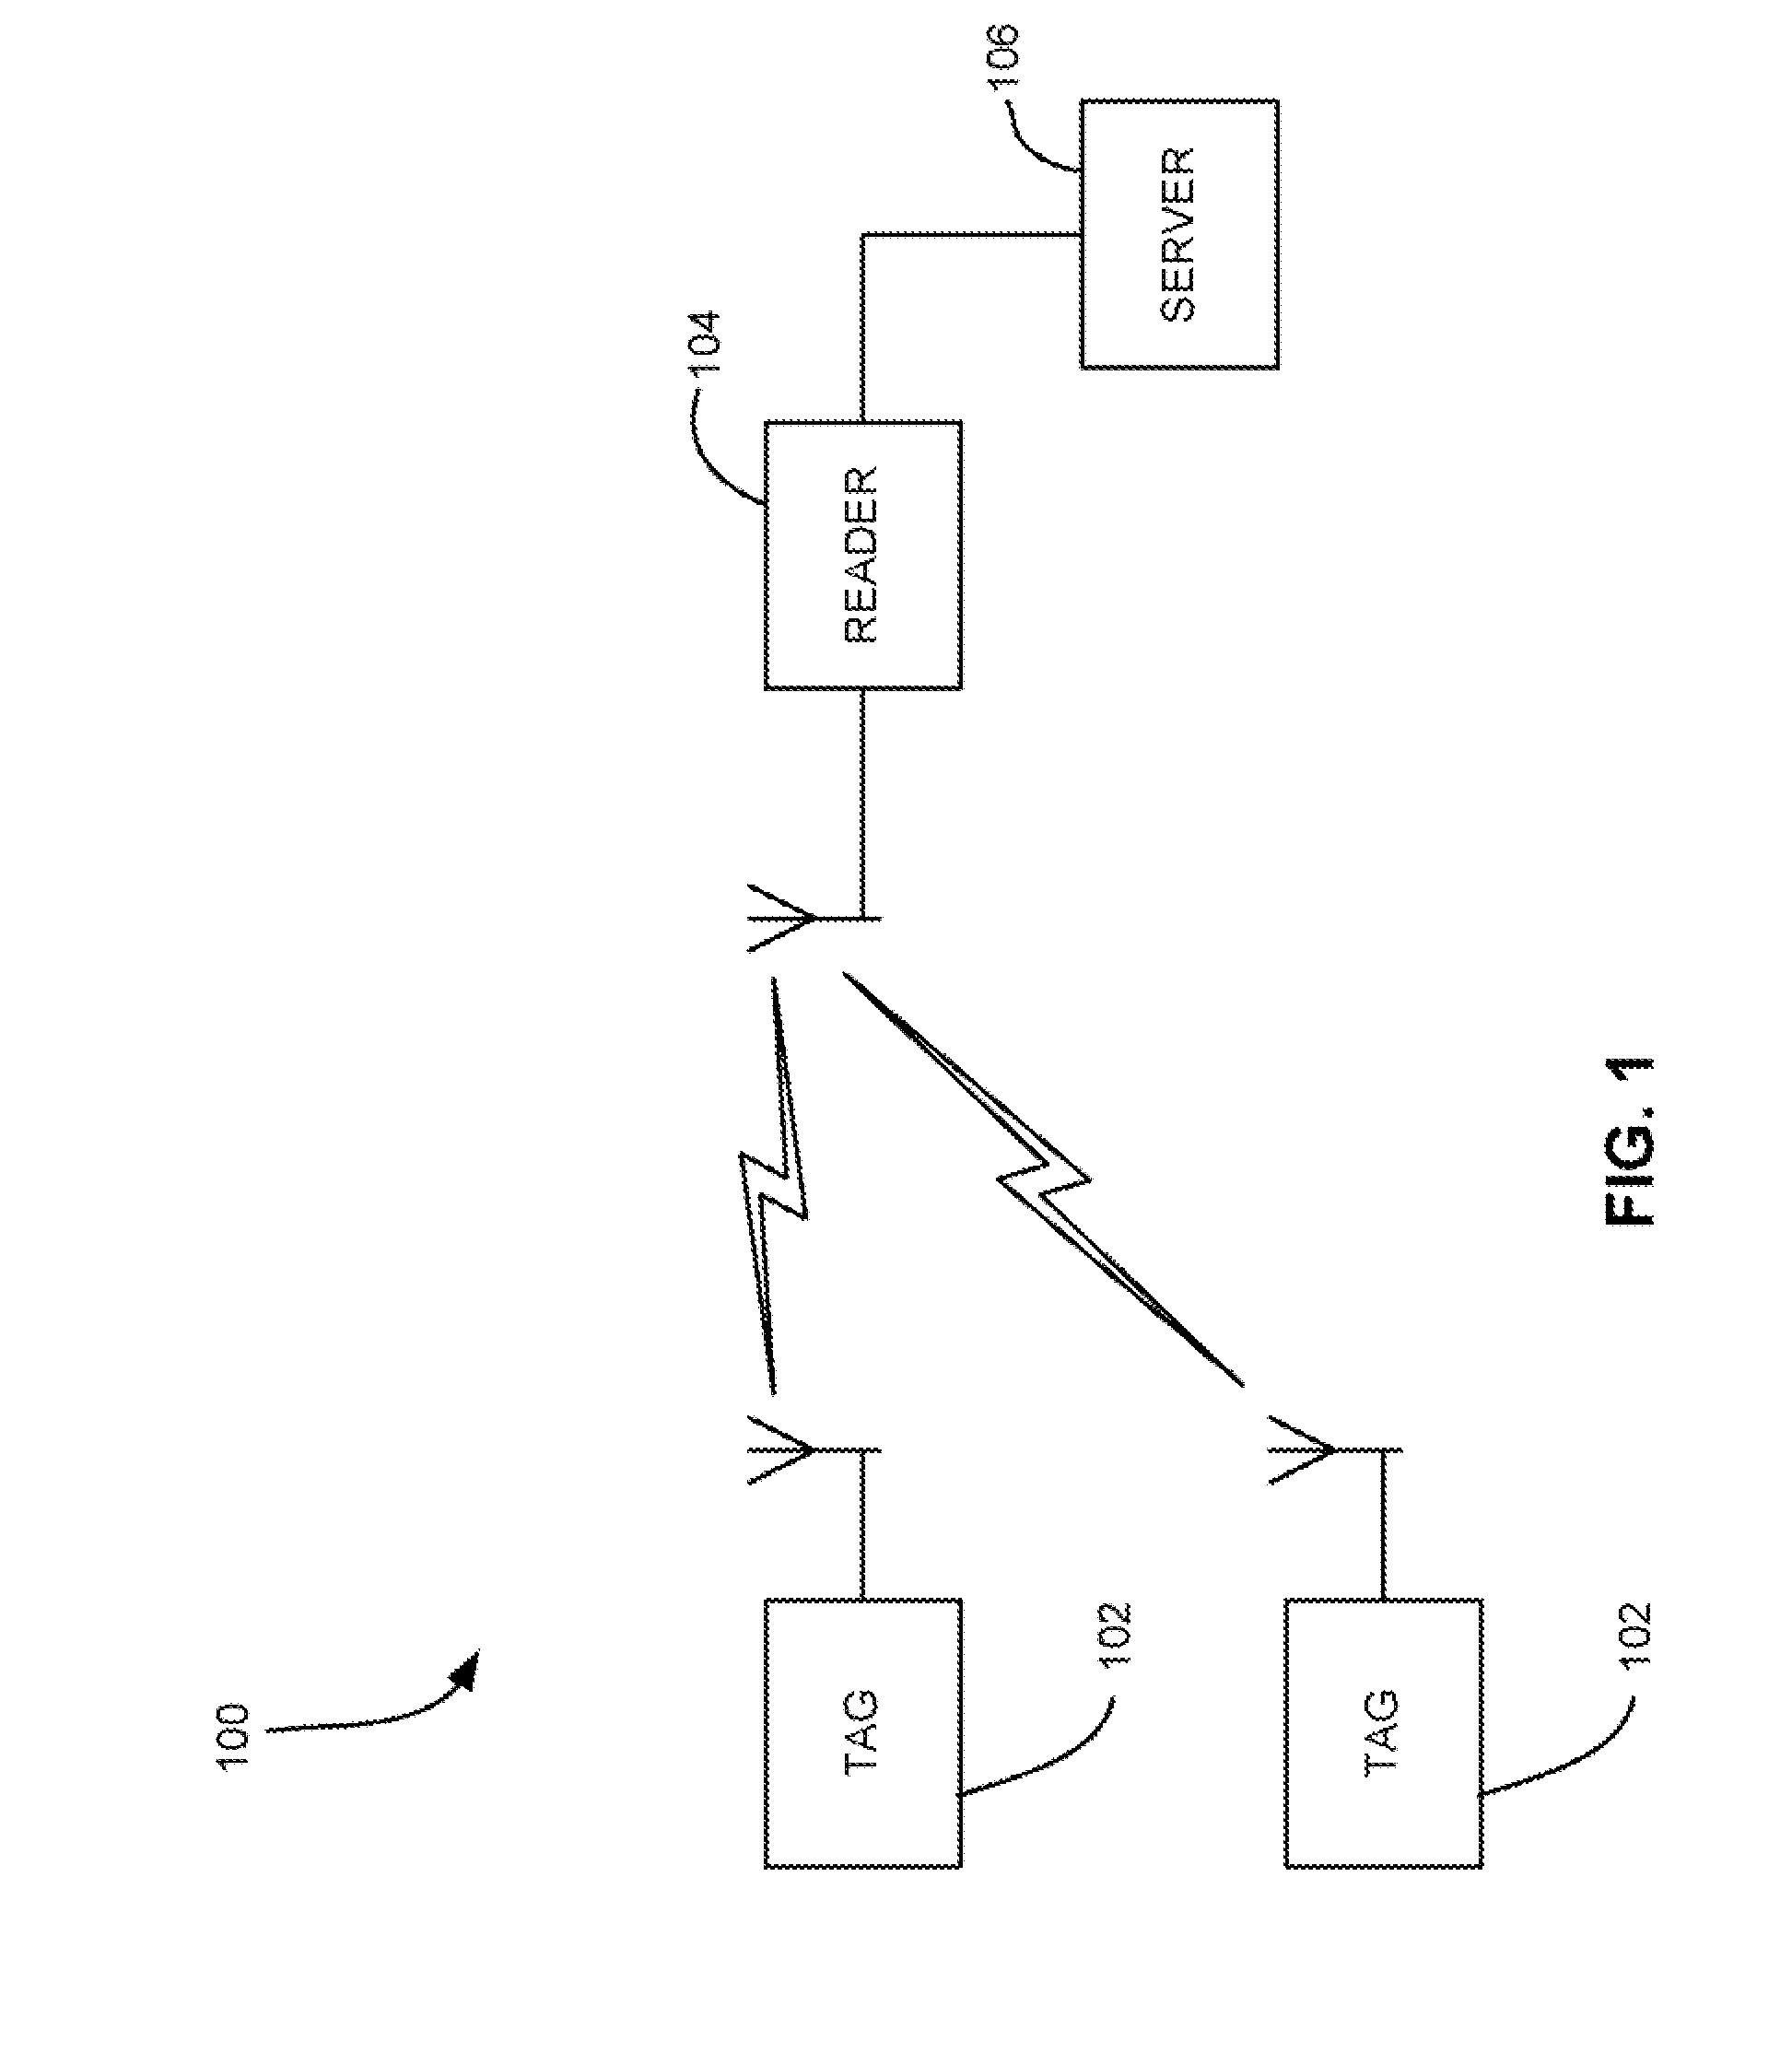 RF systems and methods for providing visual, tactile, and electronic indicators of an alarm condition